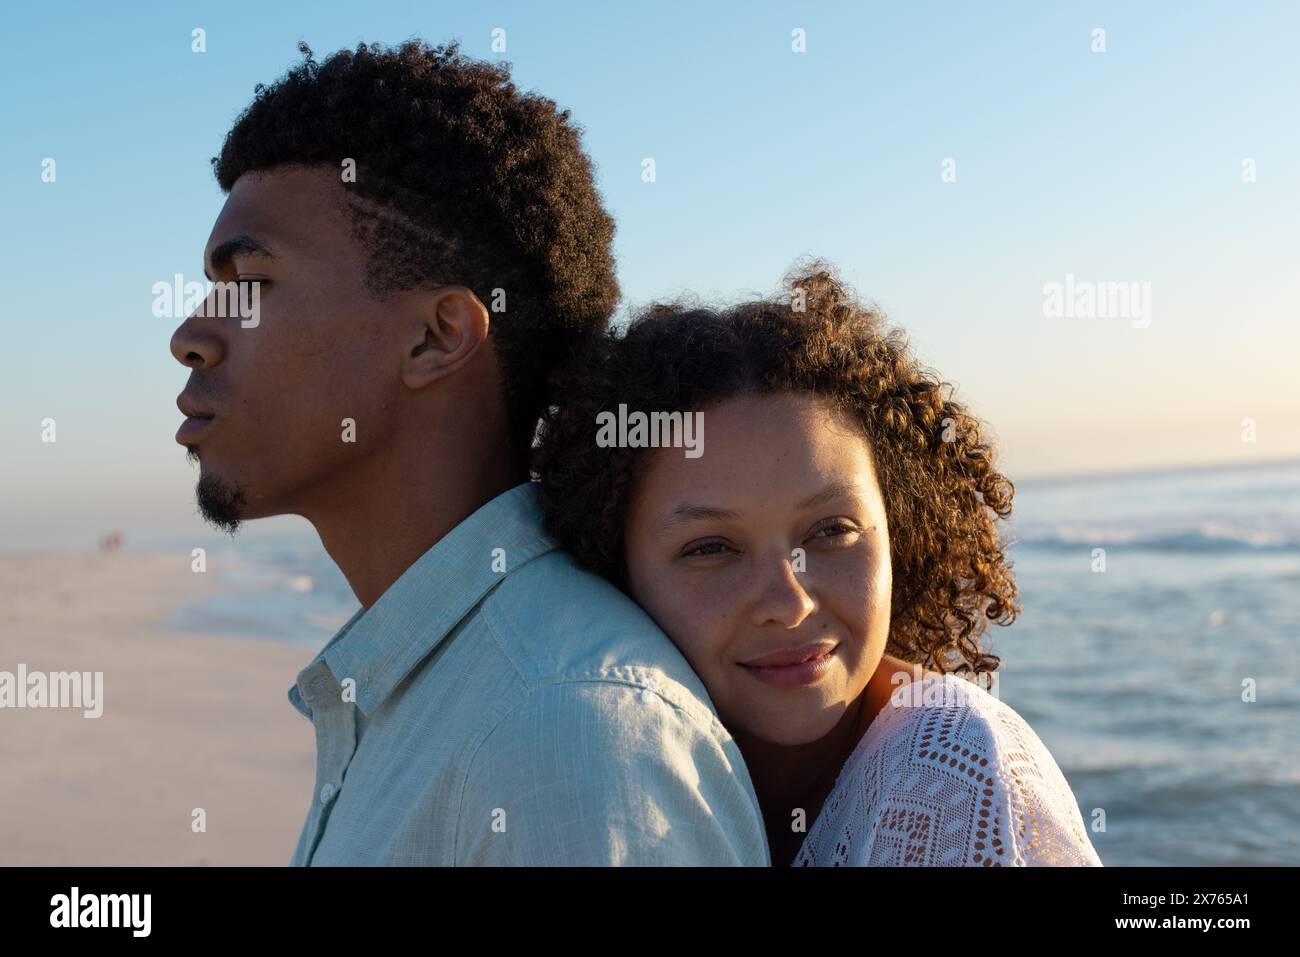 At beach, biracial couple standing, woman resting head on man's shoulder Stock Photo